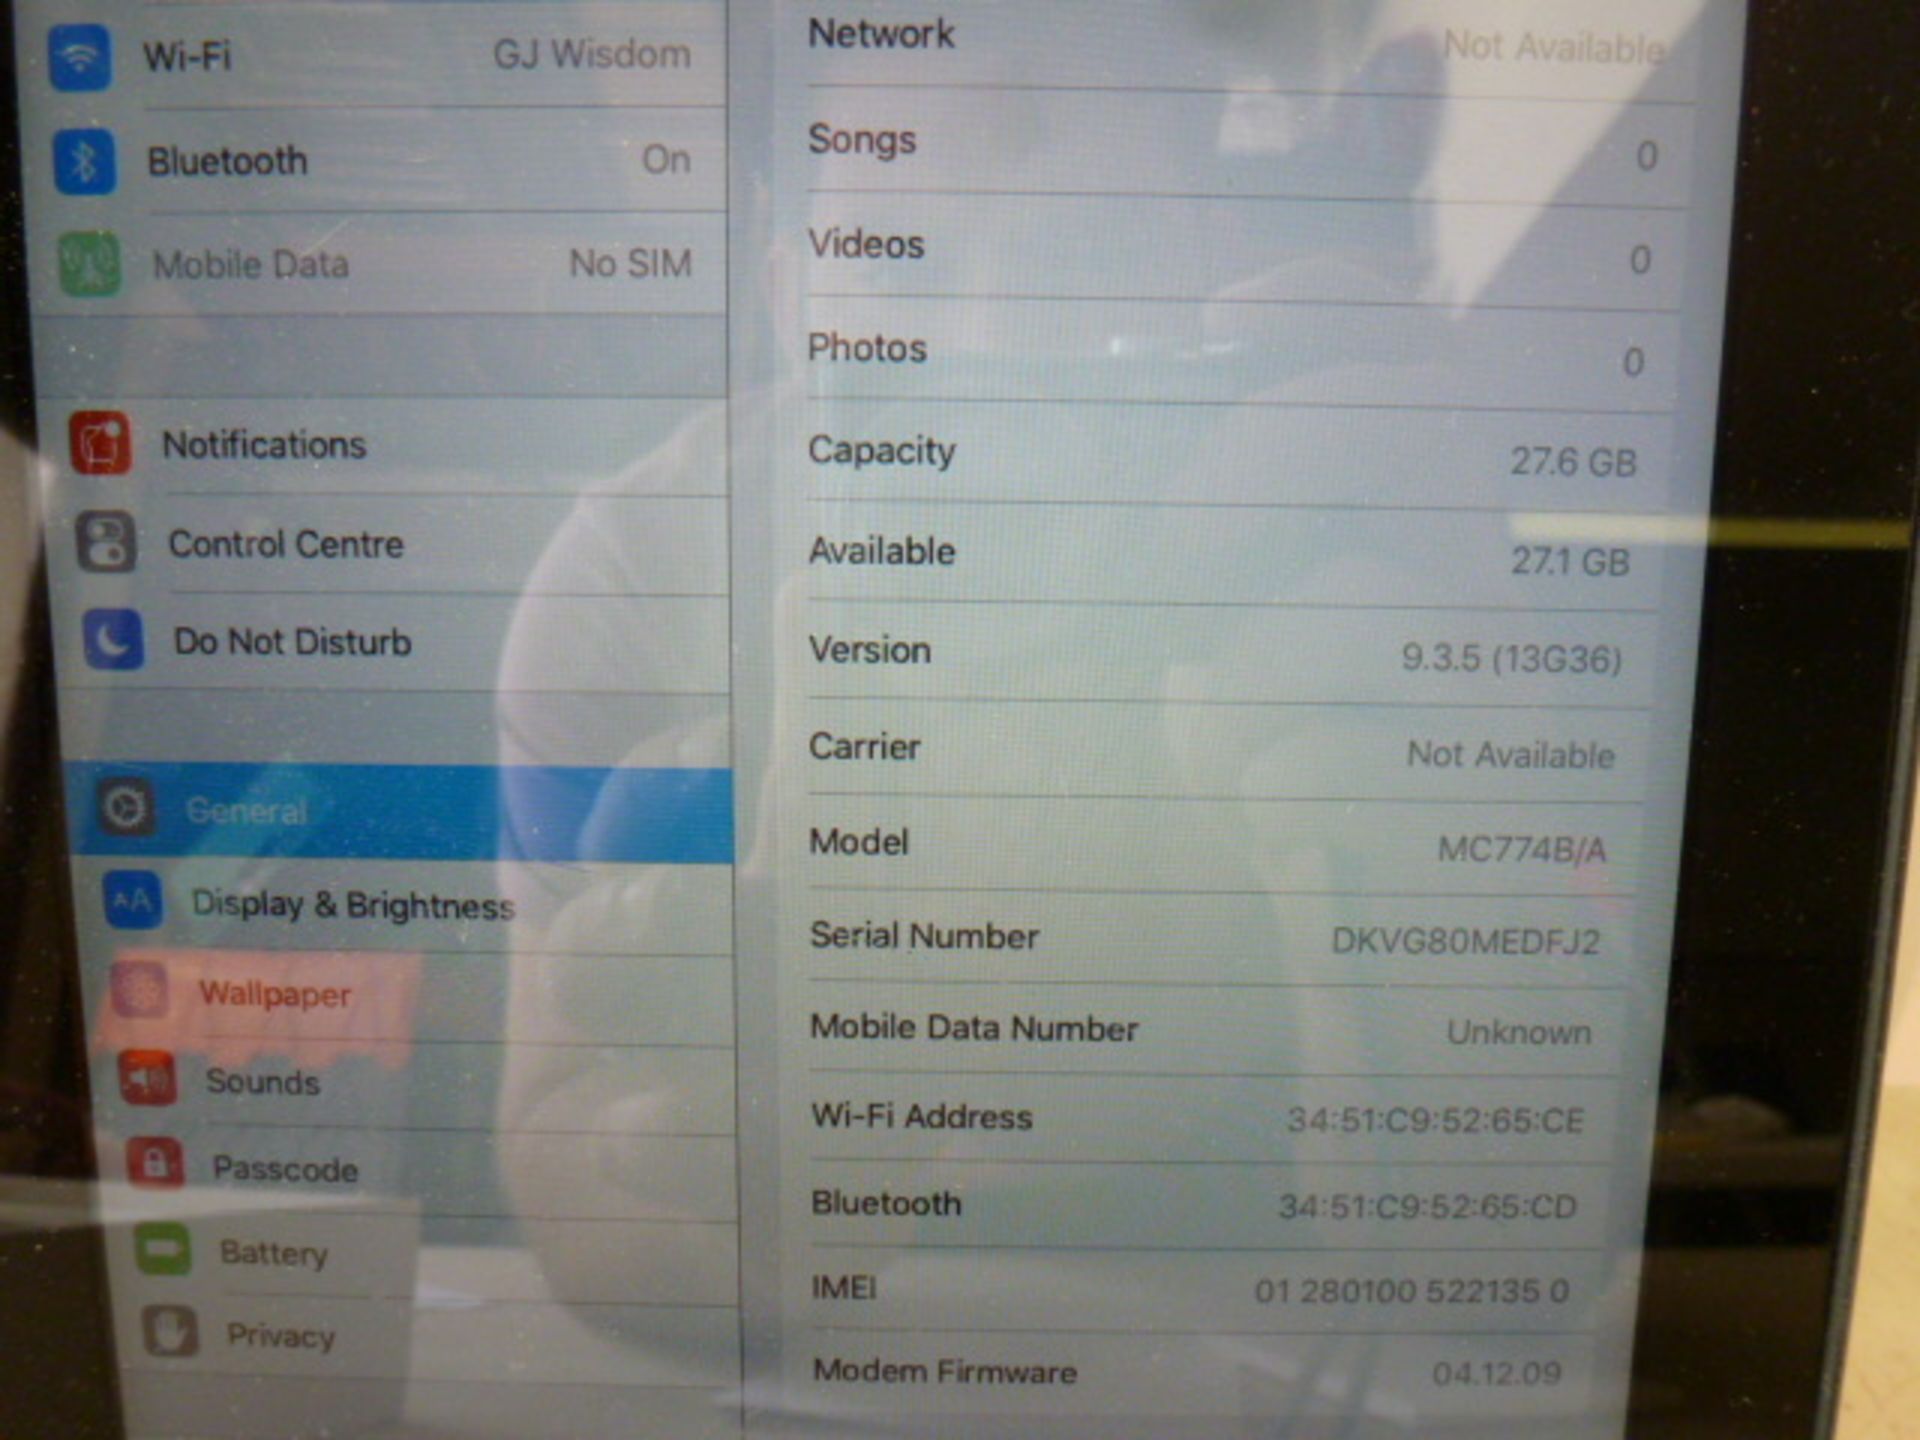 Ipad 2 Model A1396, Wi-Fi 3G, 32GB. Comes with Box & Charger. (Slight Damage to Screen as Viewed/ - Image 3 of 4